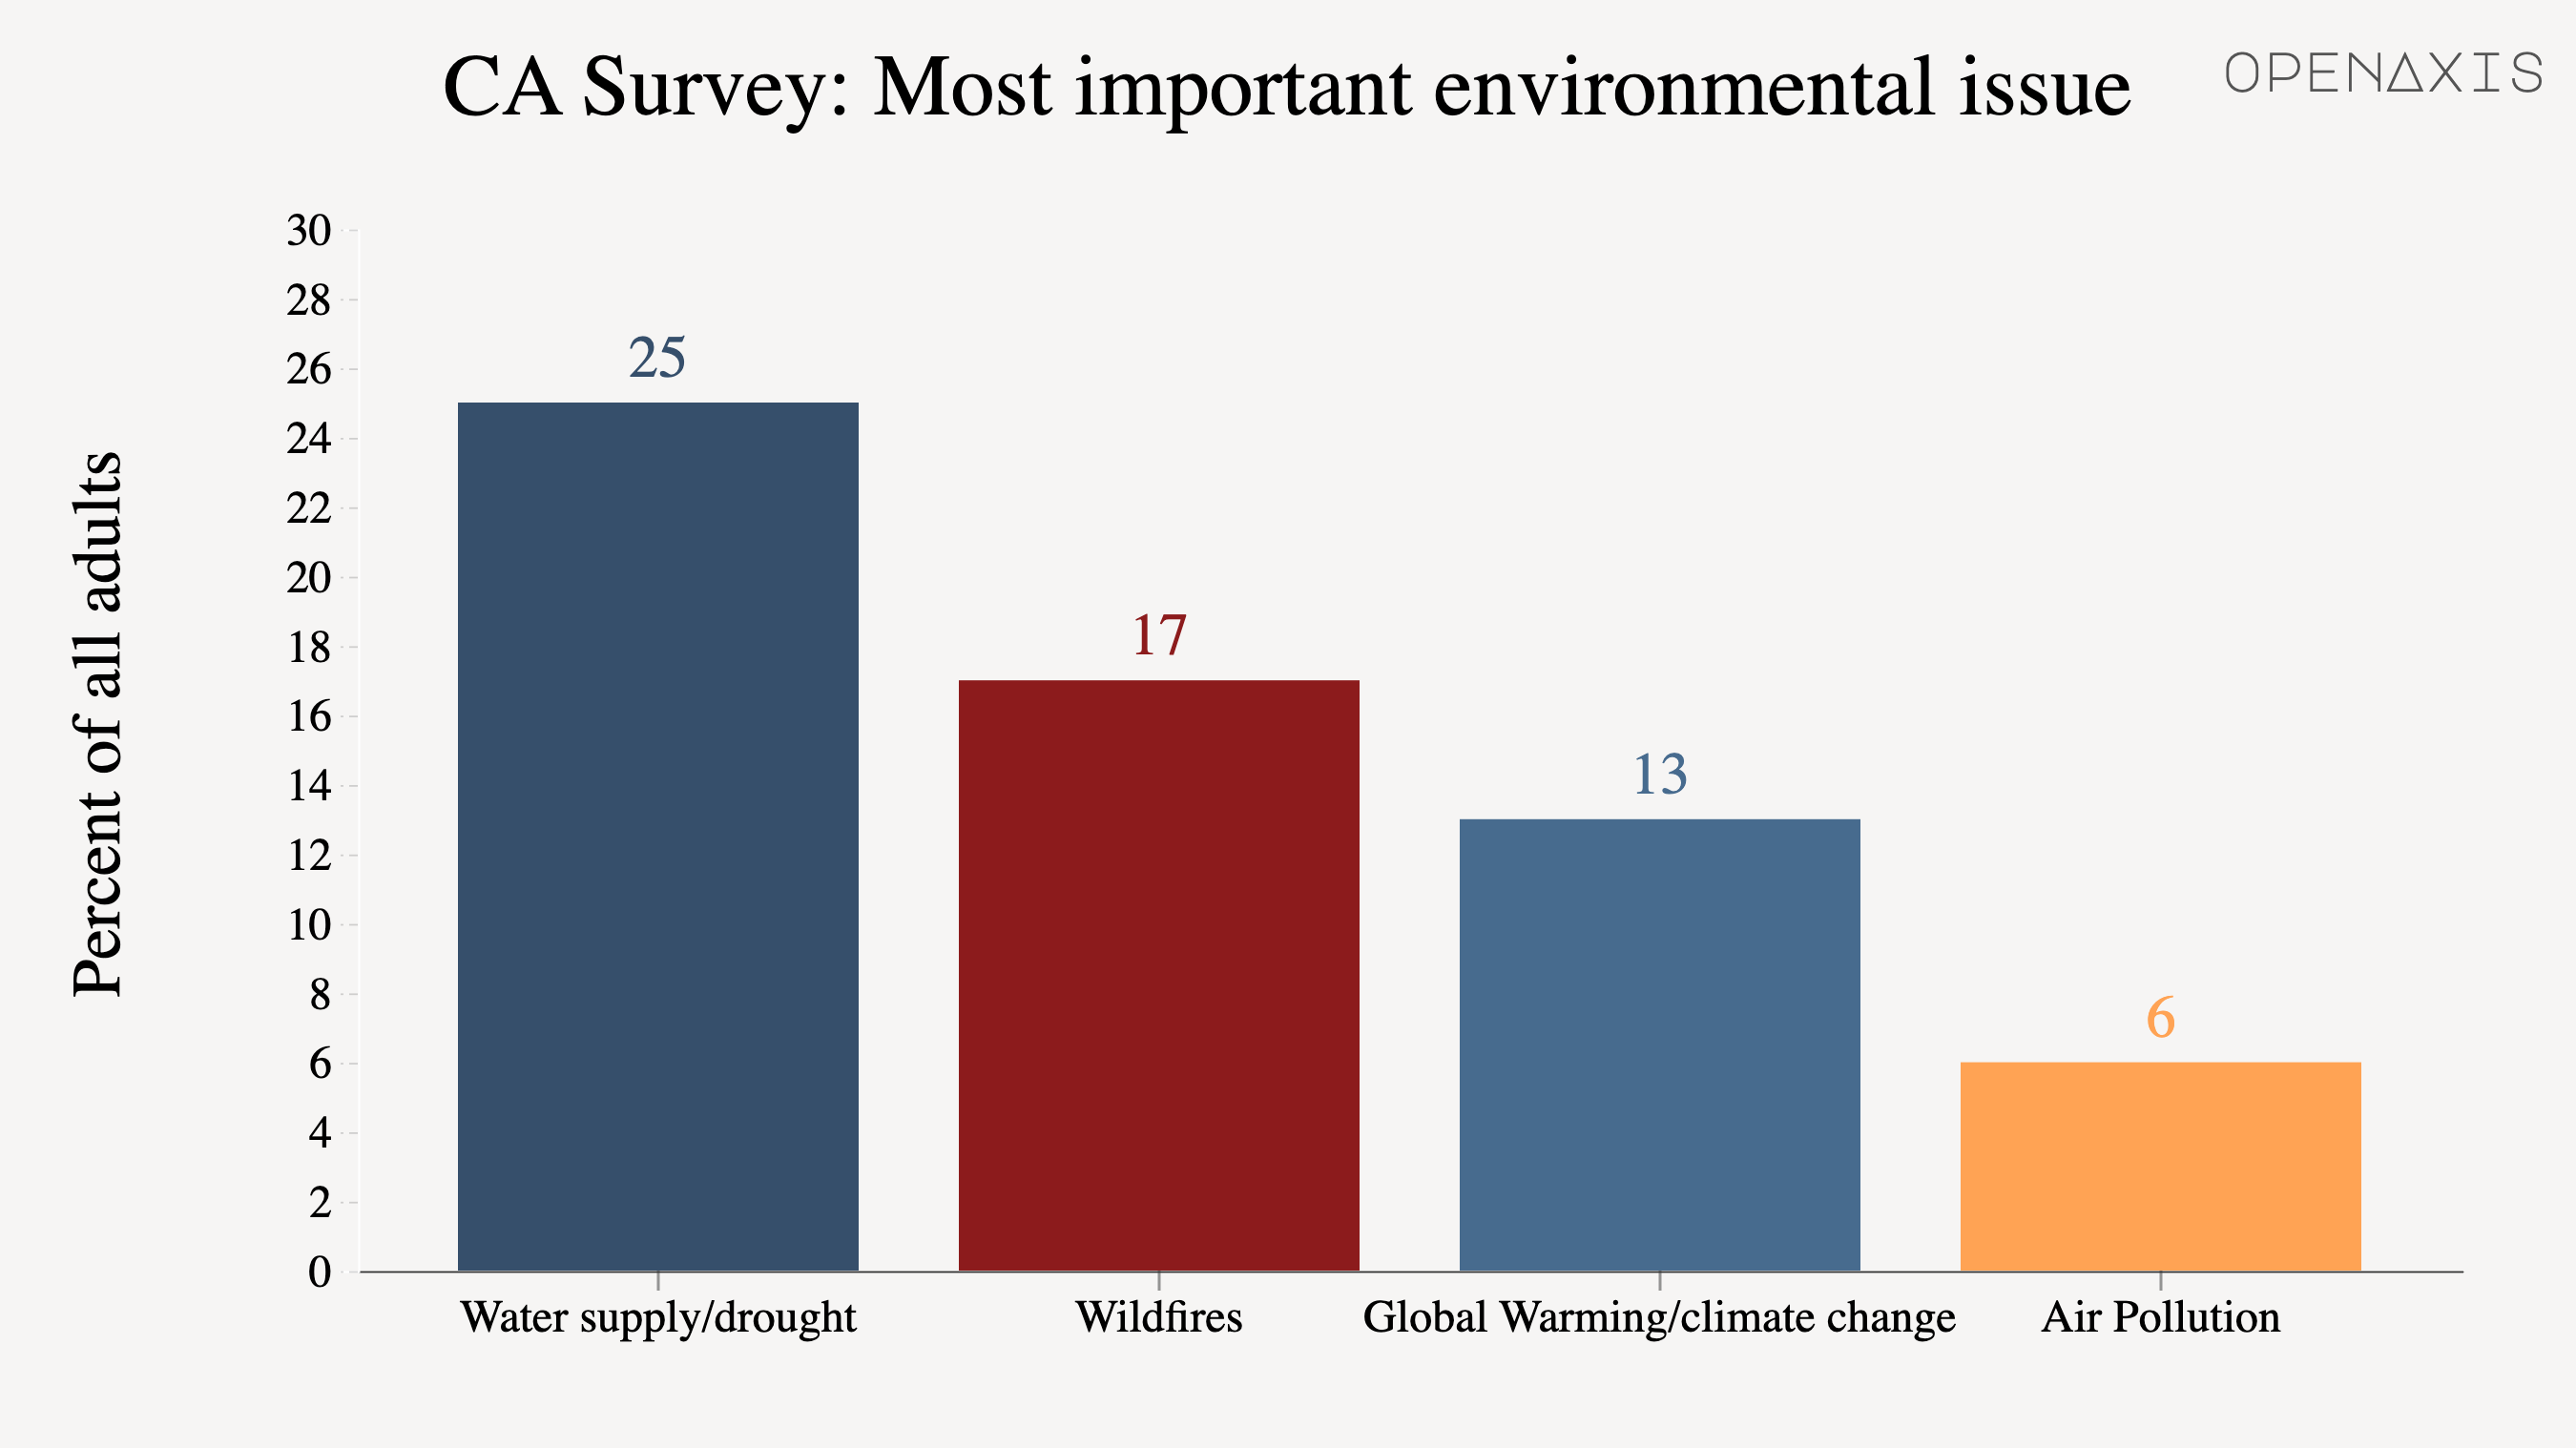 "CA Survey: Most important environmental issue "